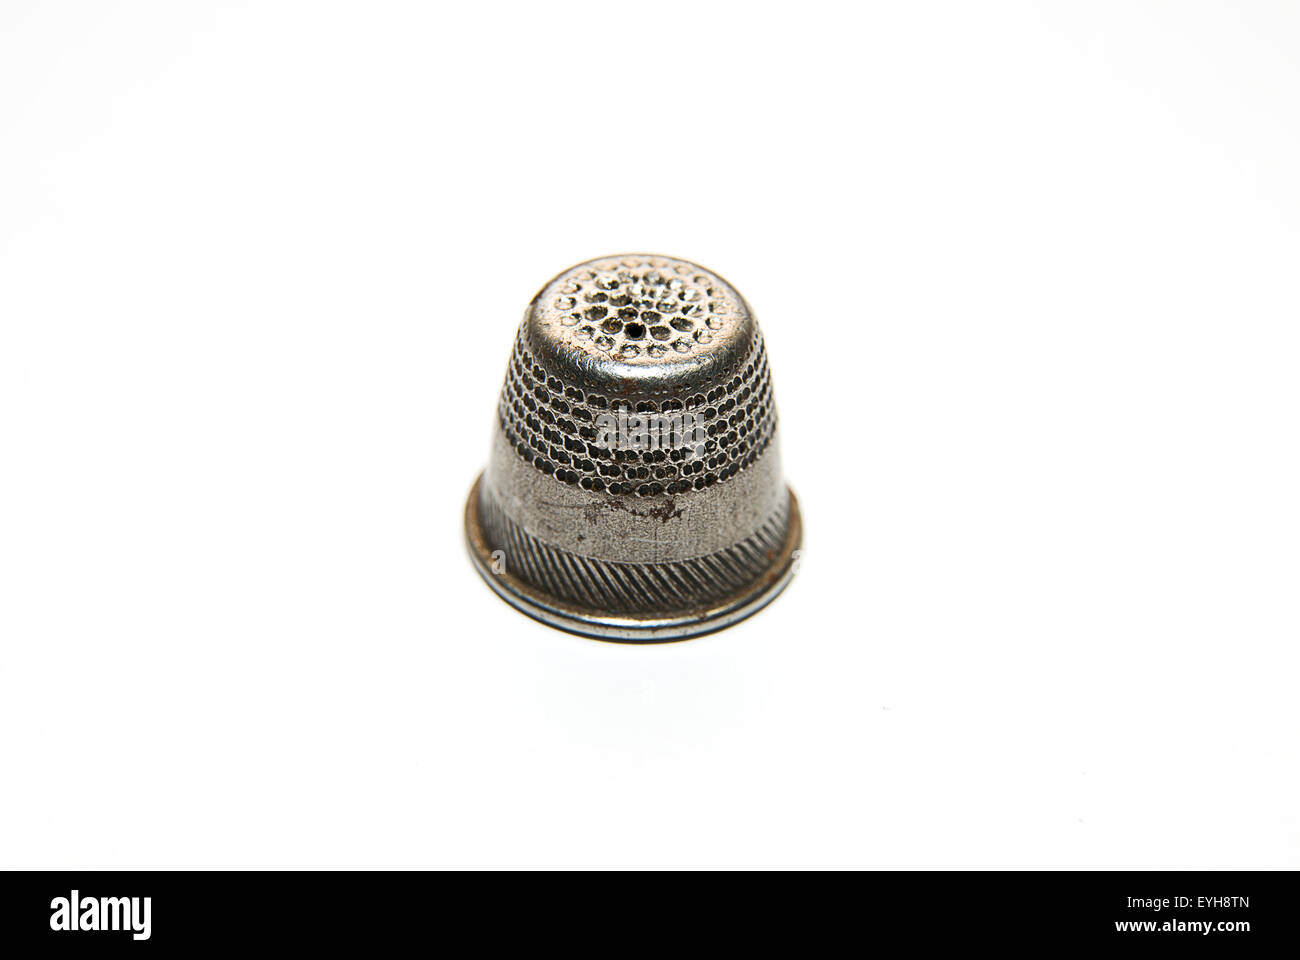 Vintage Iron thimble for hand embroidery on a white background Stock Photo